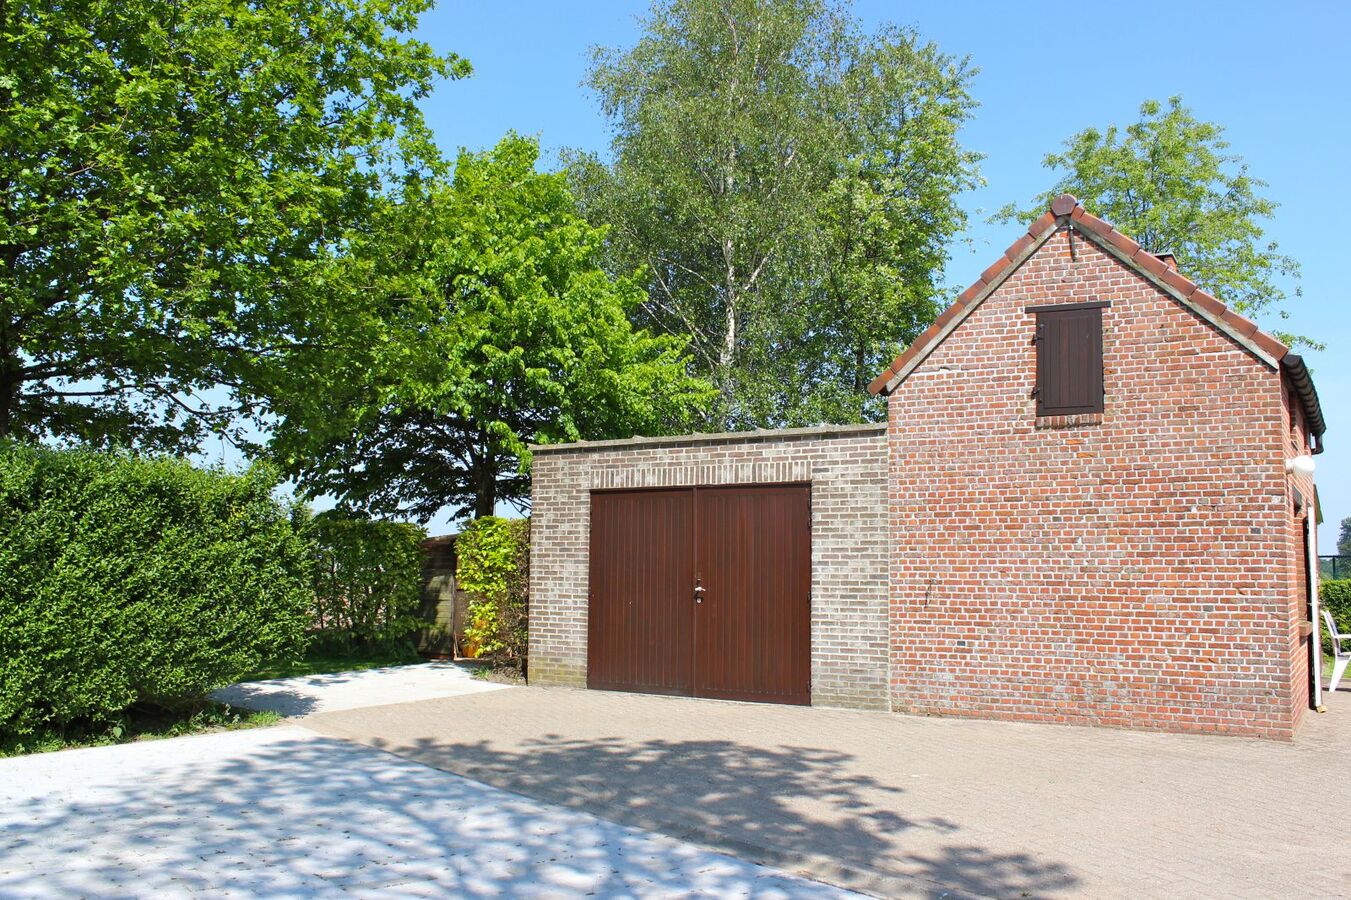 Property sold in Herenthout